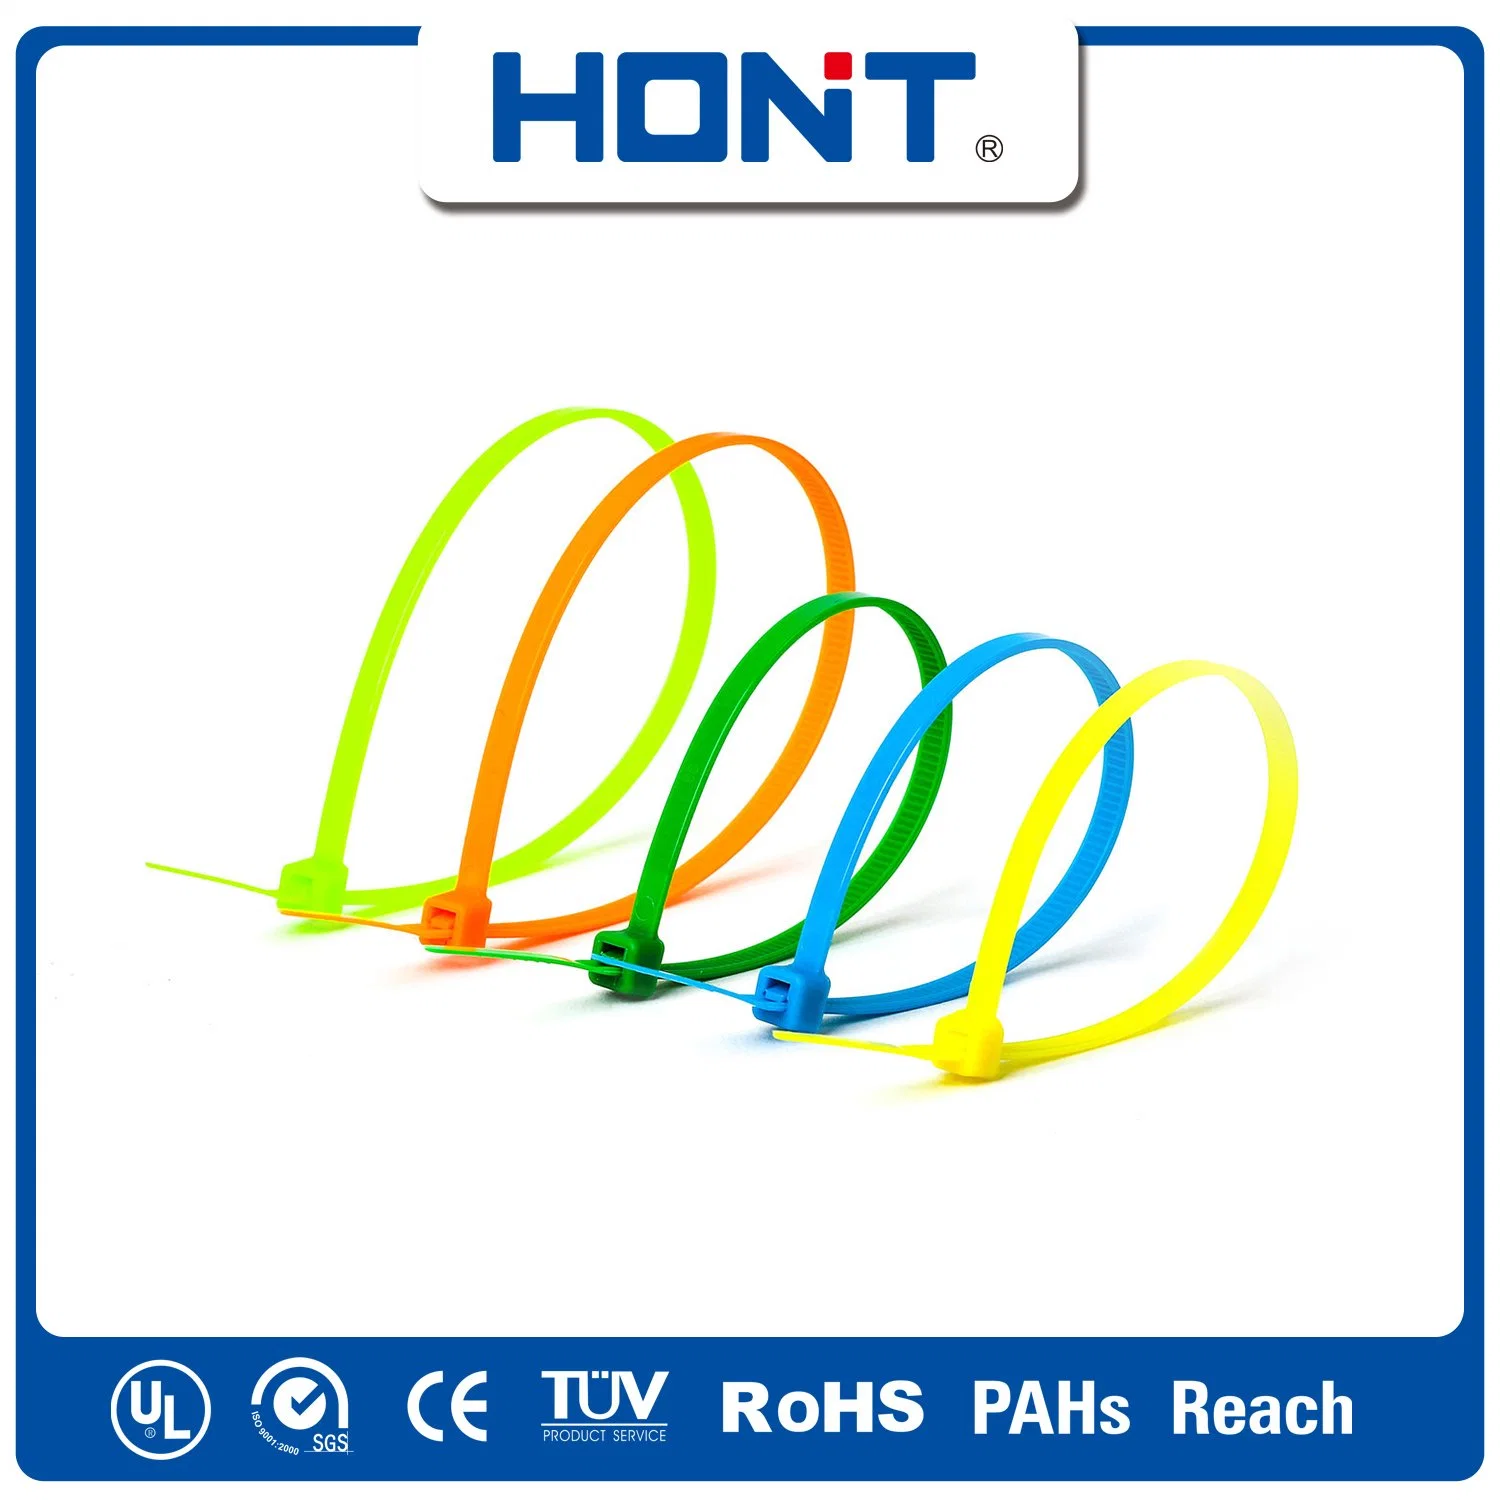 ISO Approved Self-Locking Tie Hont Plastic Bag + Sticker Exporting Carton/Tray Nylon Cable Accessories